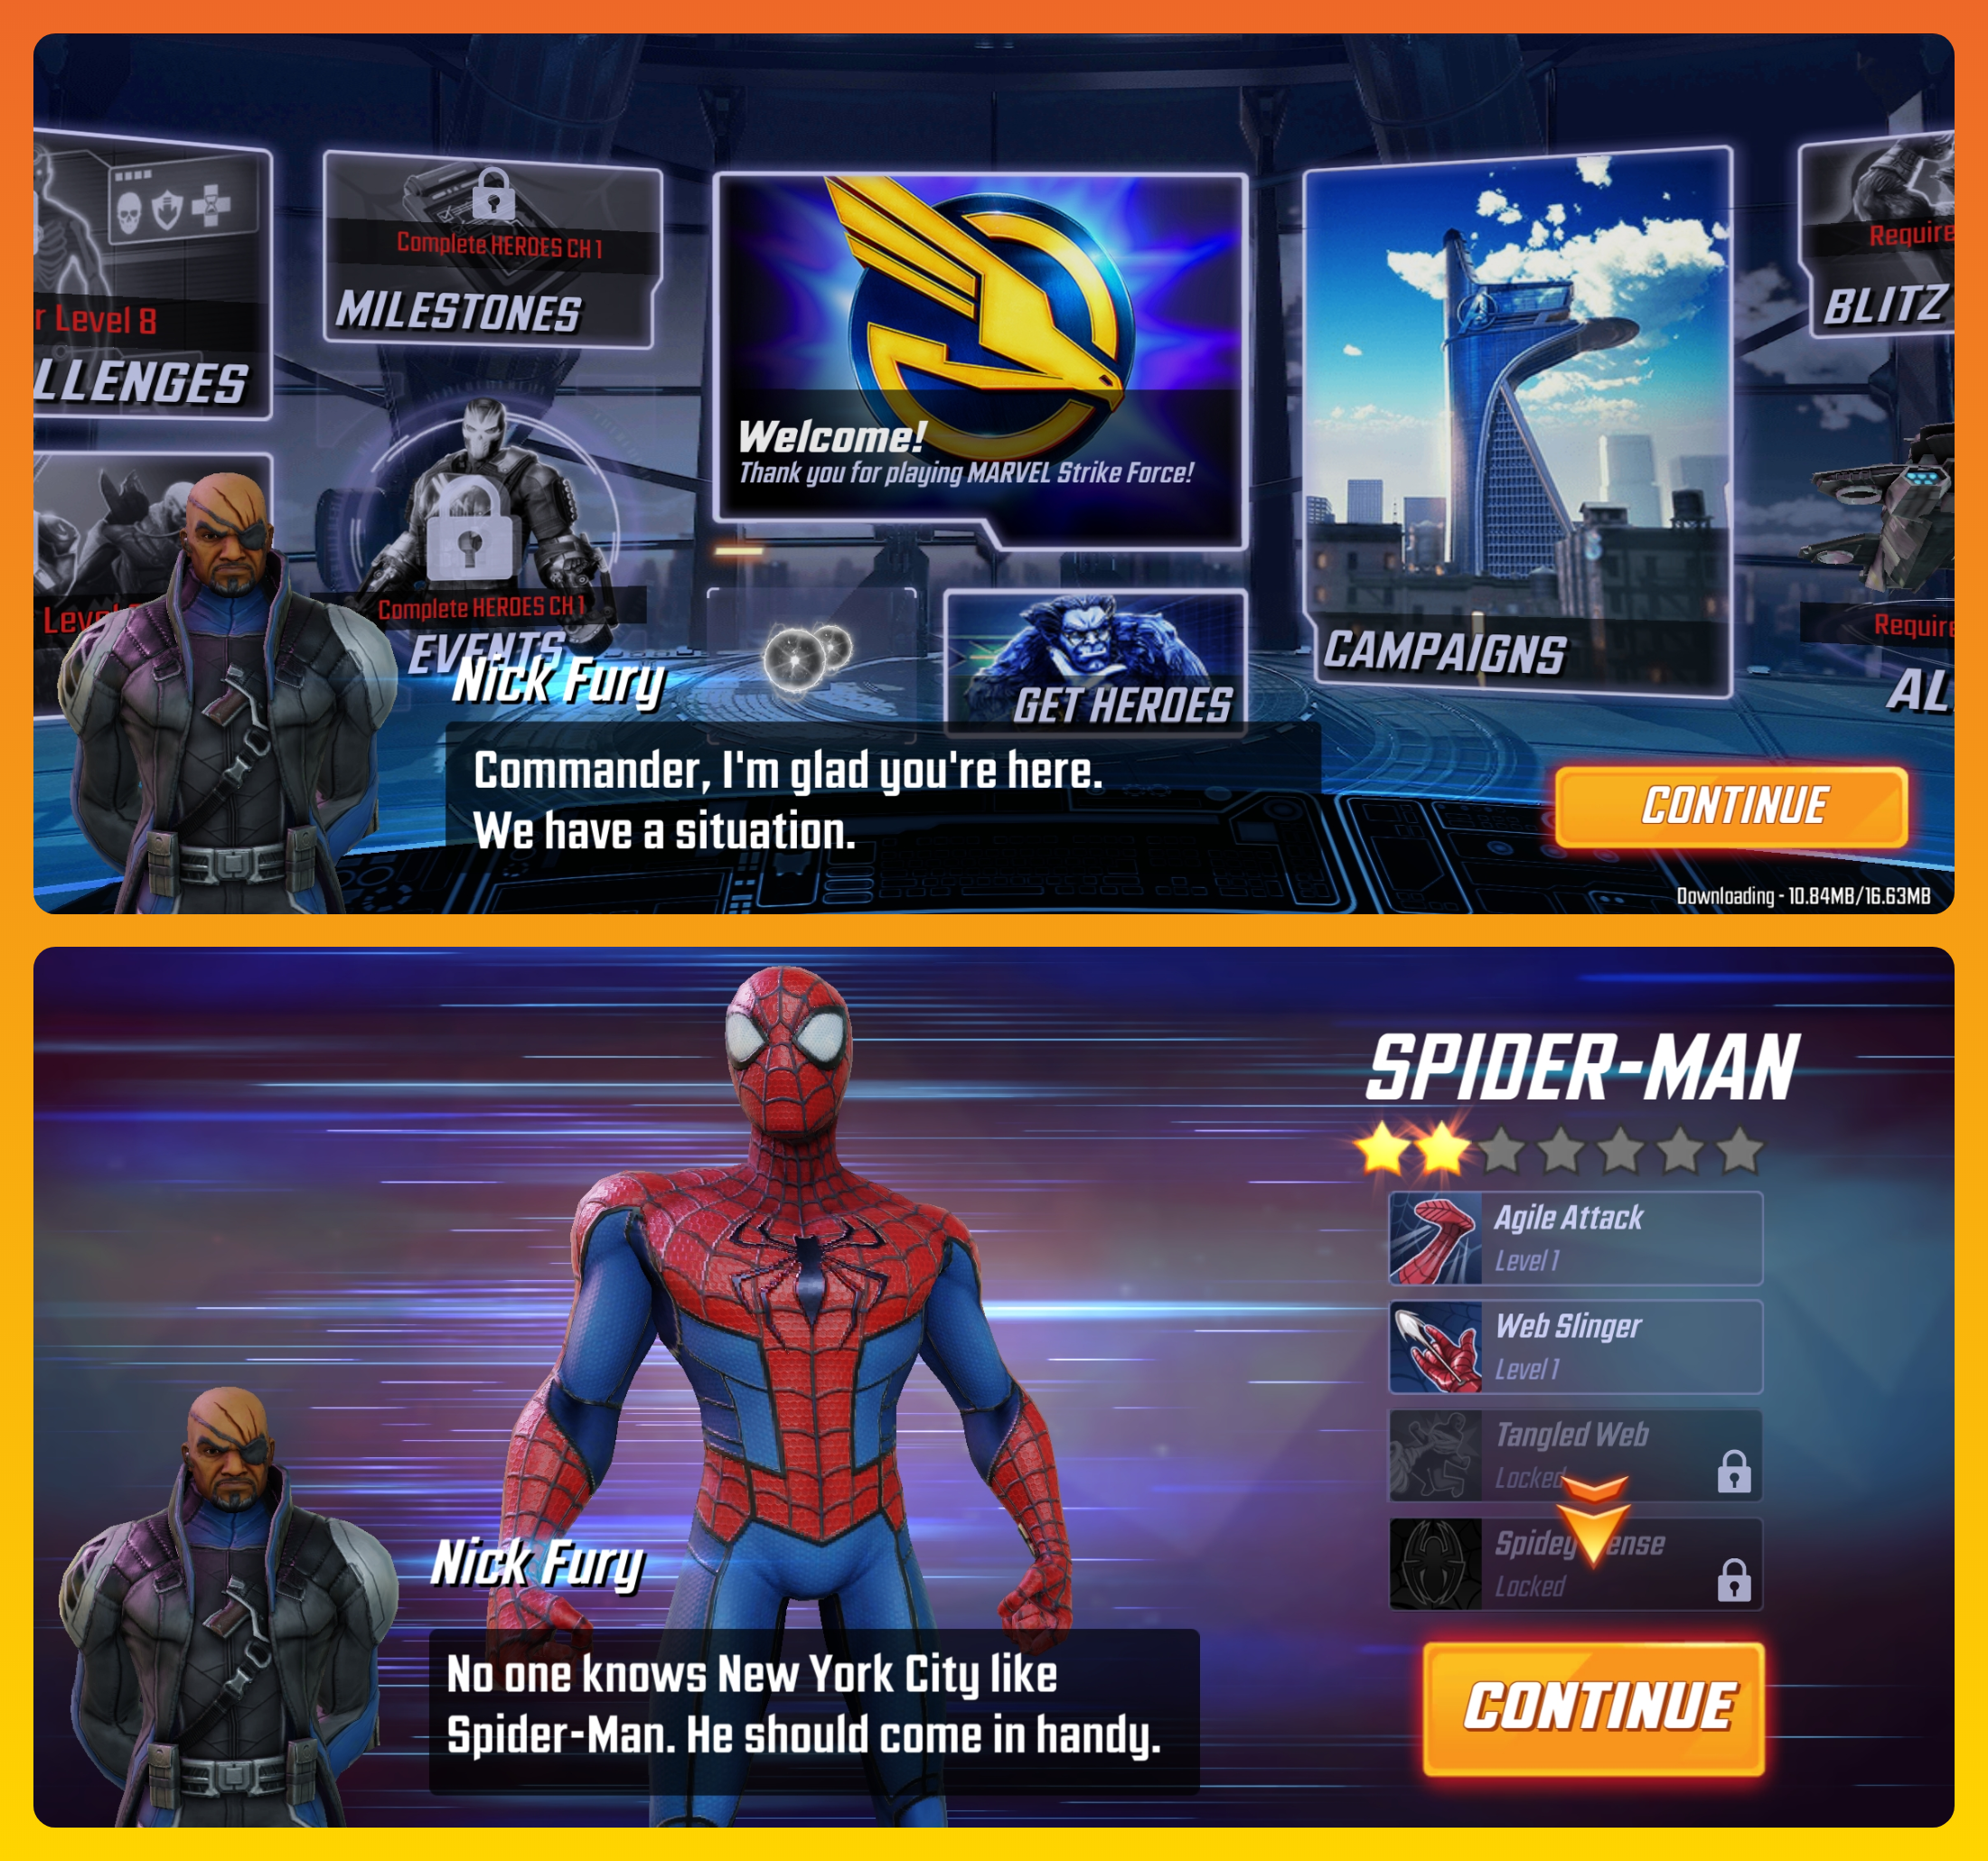 AppShare] MARVEL Strike Force, Explore It On AppGallery